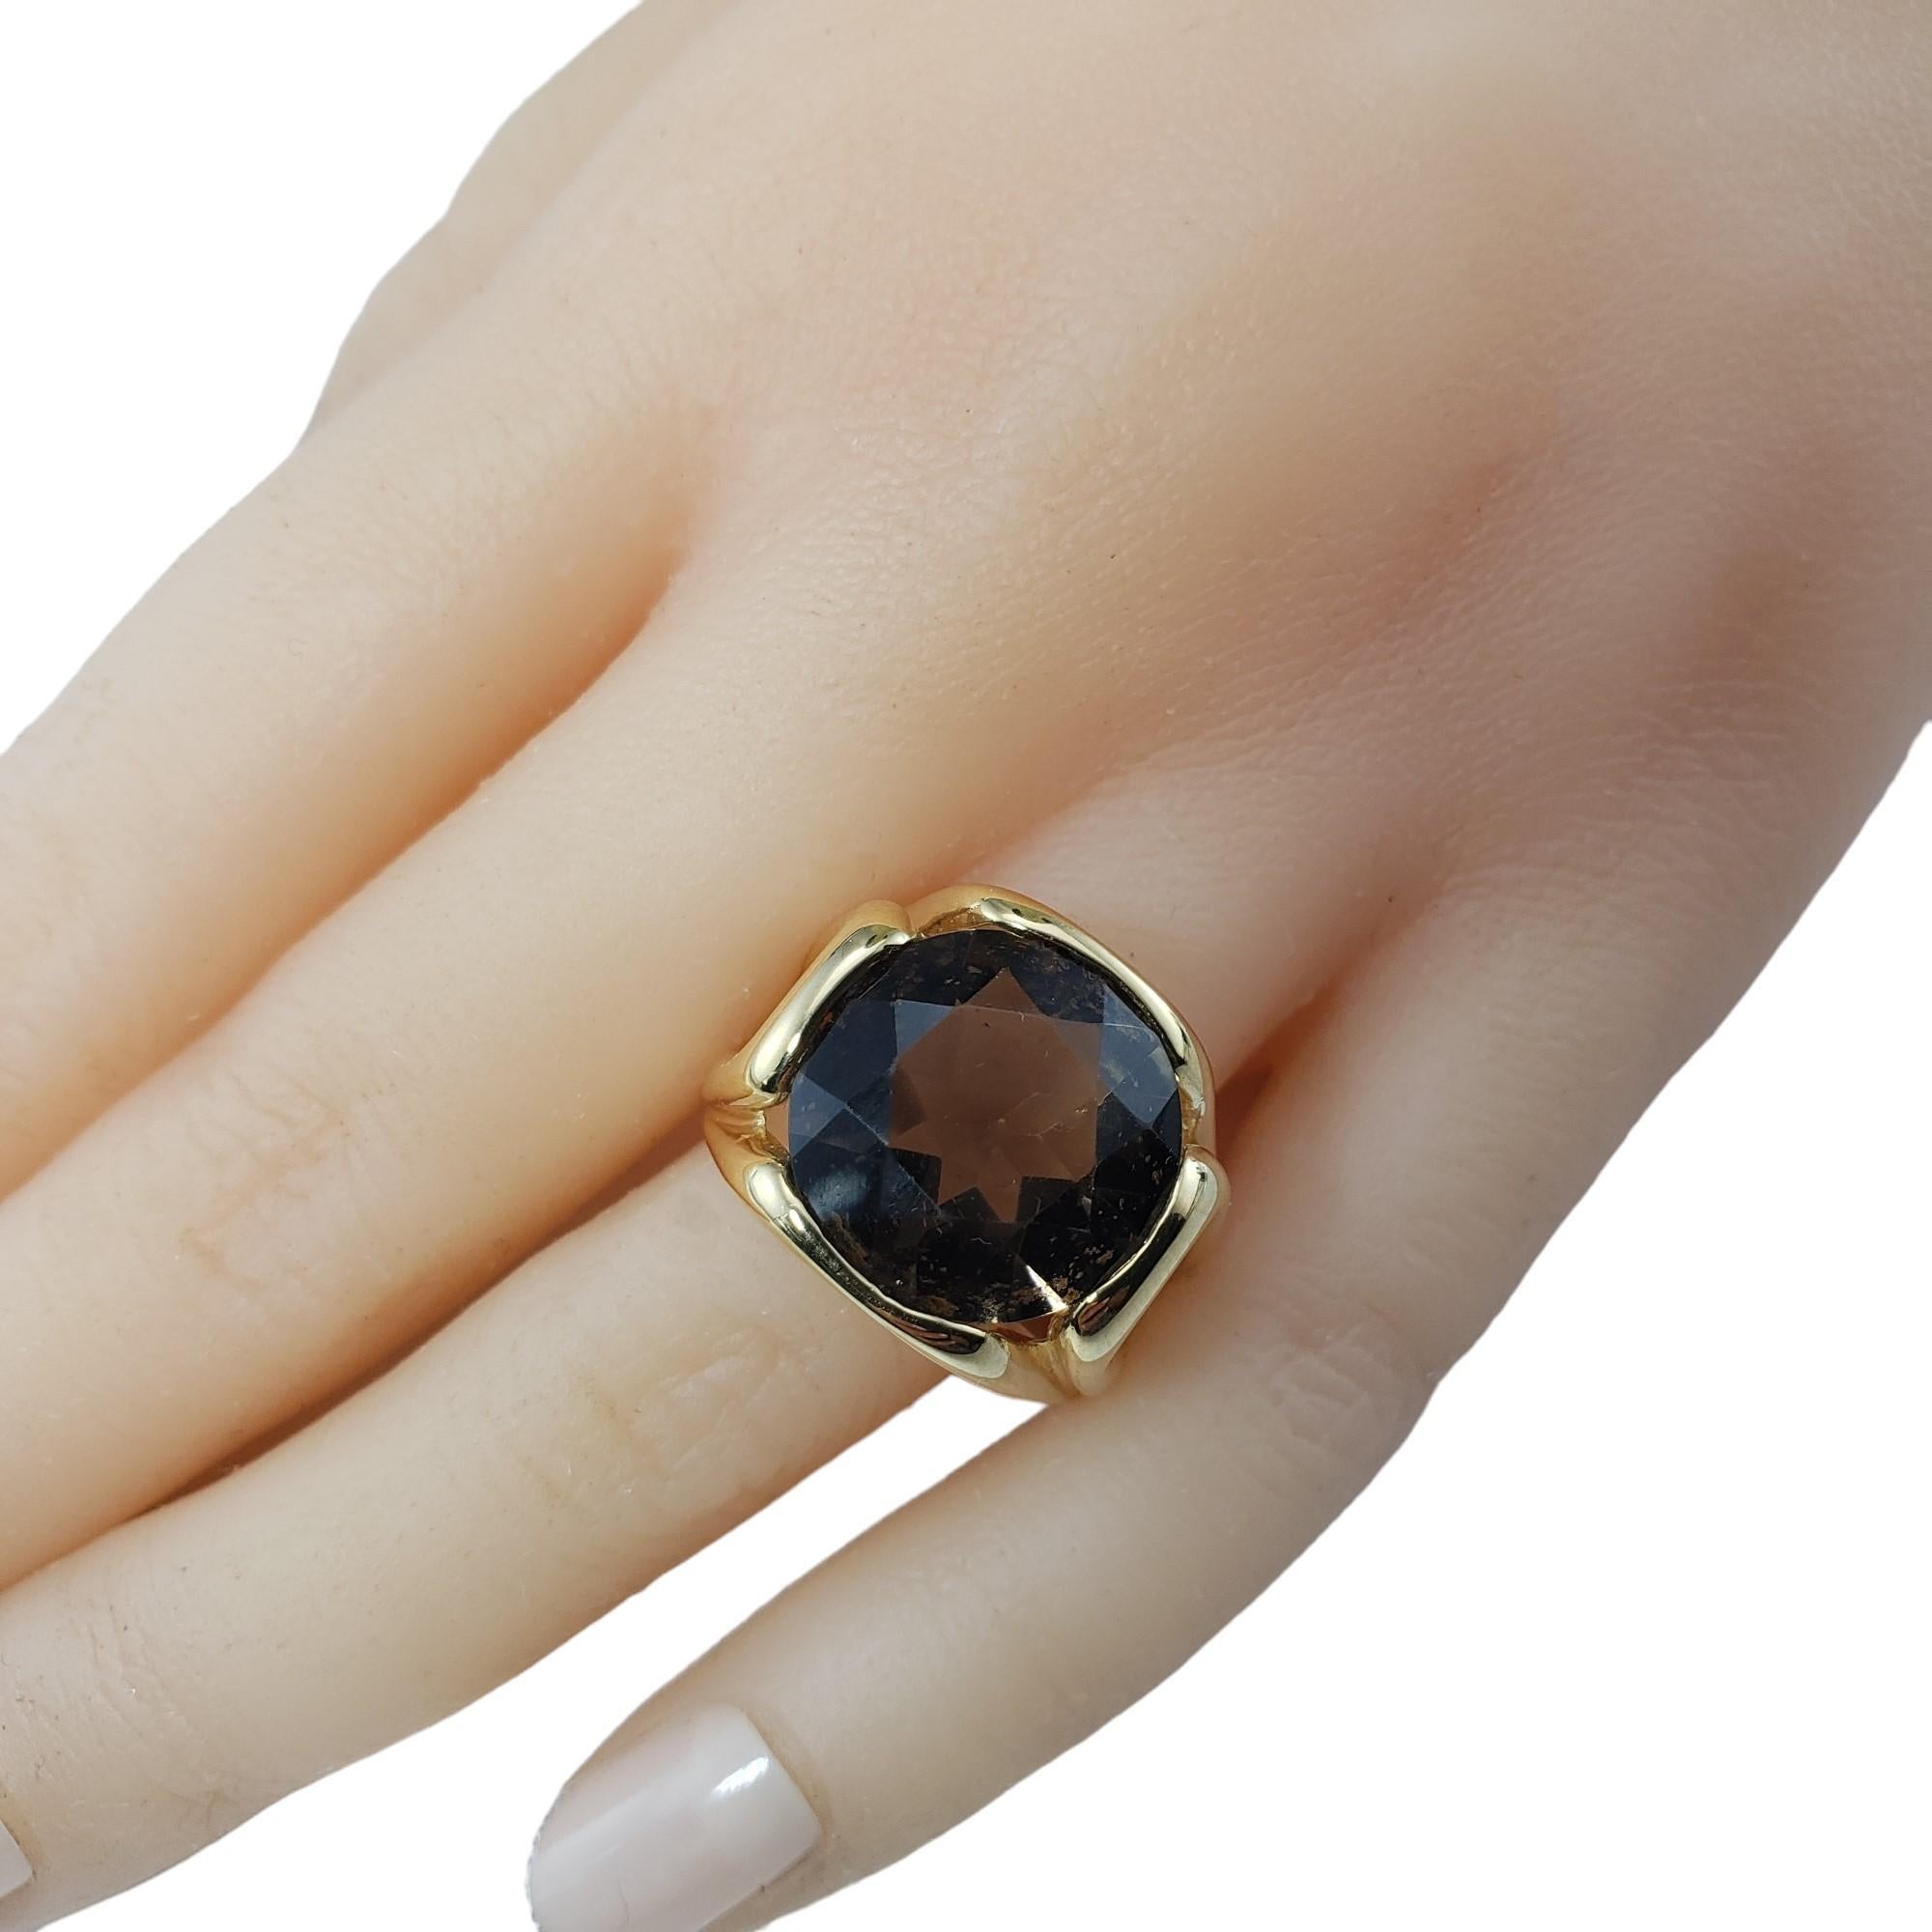  14K Yellow Gold Smoky Quartz Ring Size 8 #15461 For Sale 2